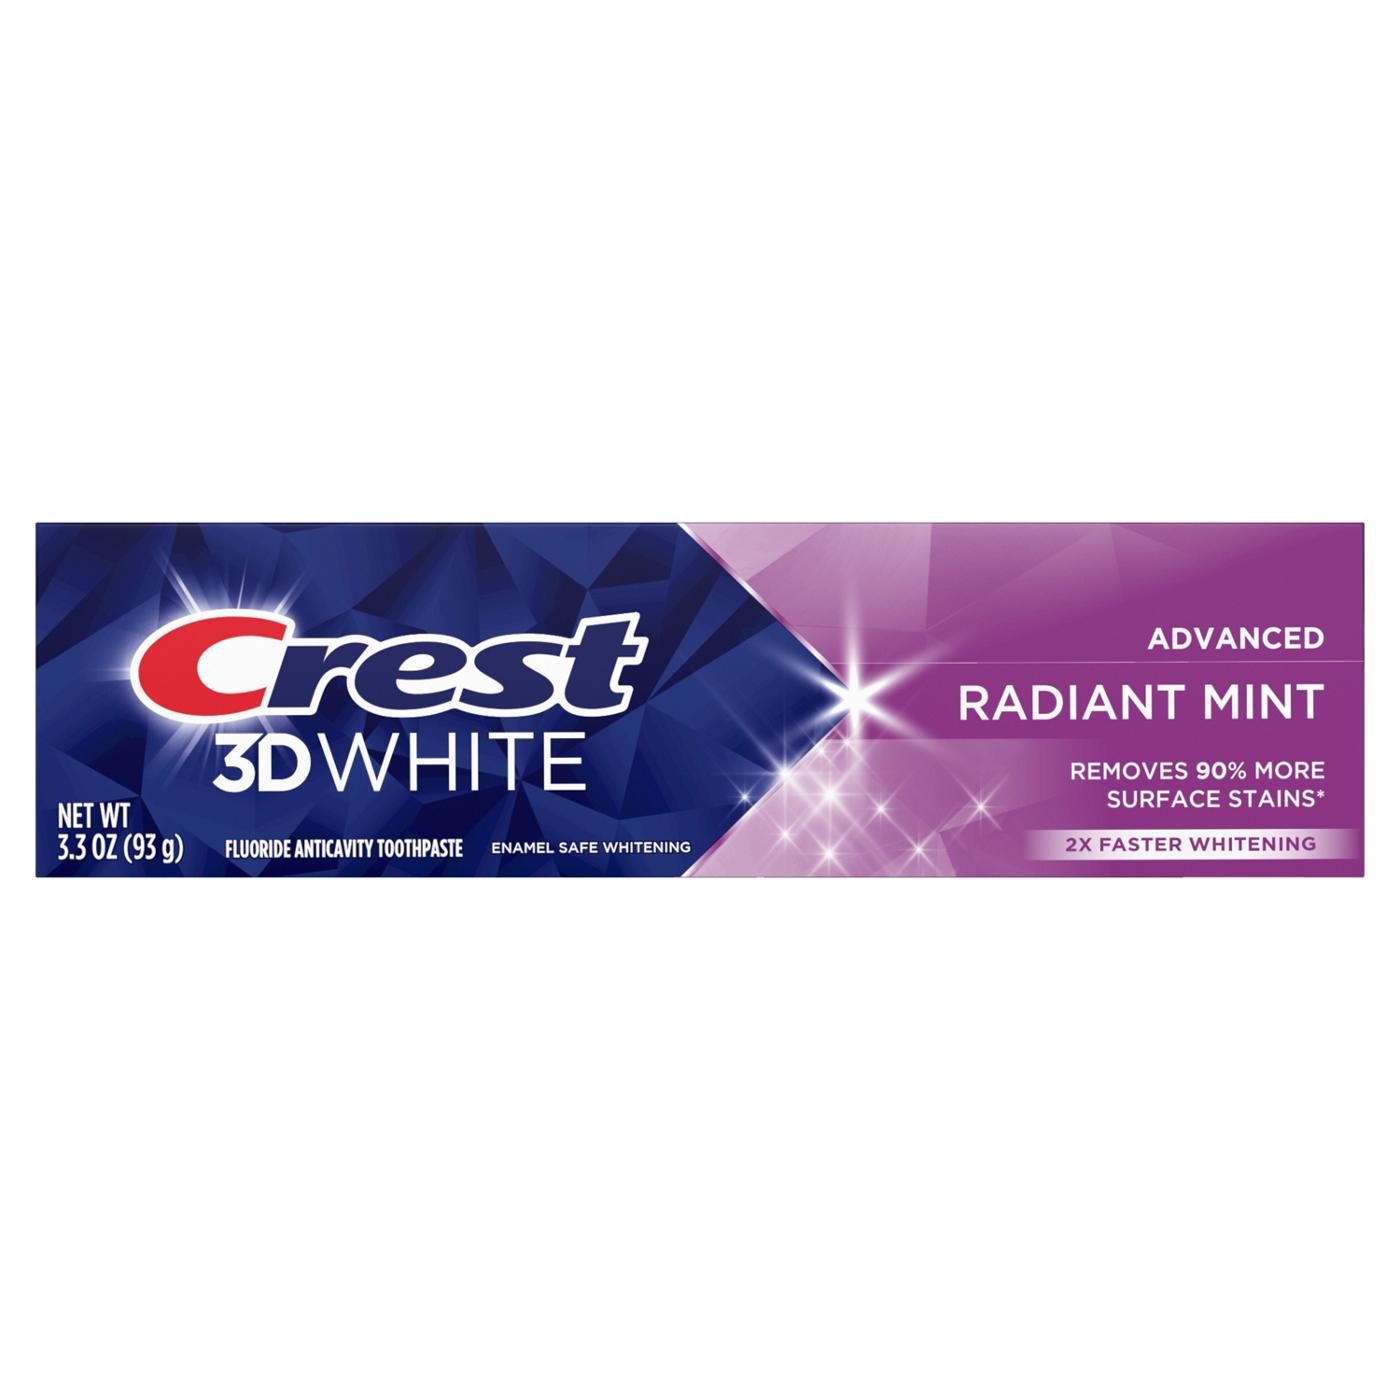 Crest 3D White Whitening Toothpaste - Radiant Mint; image 1 of 8